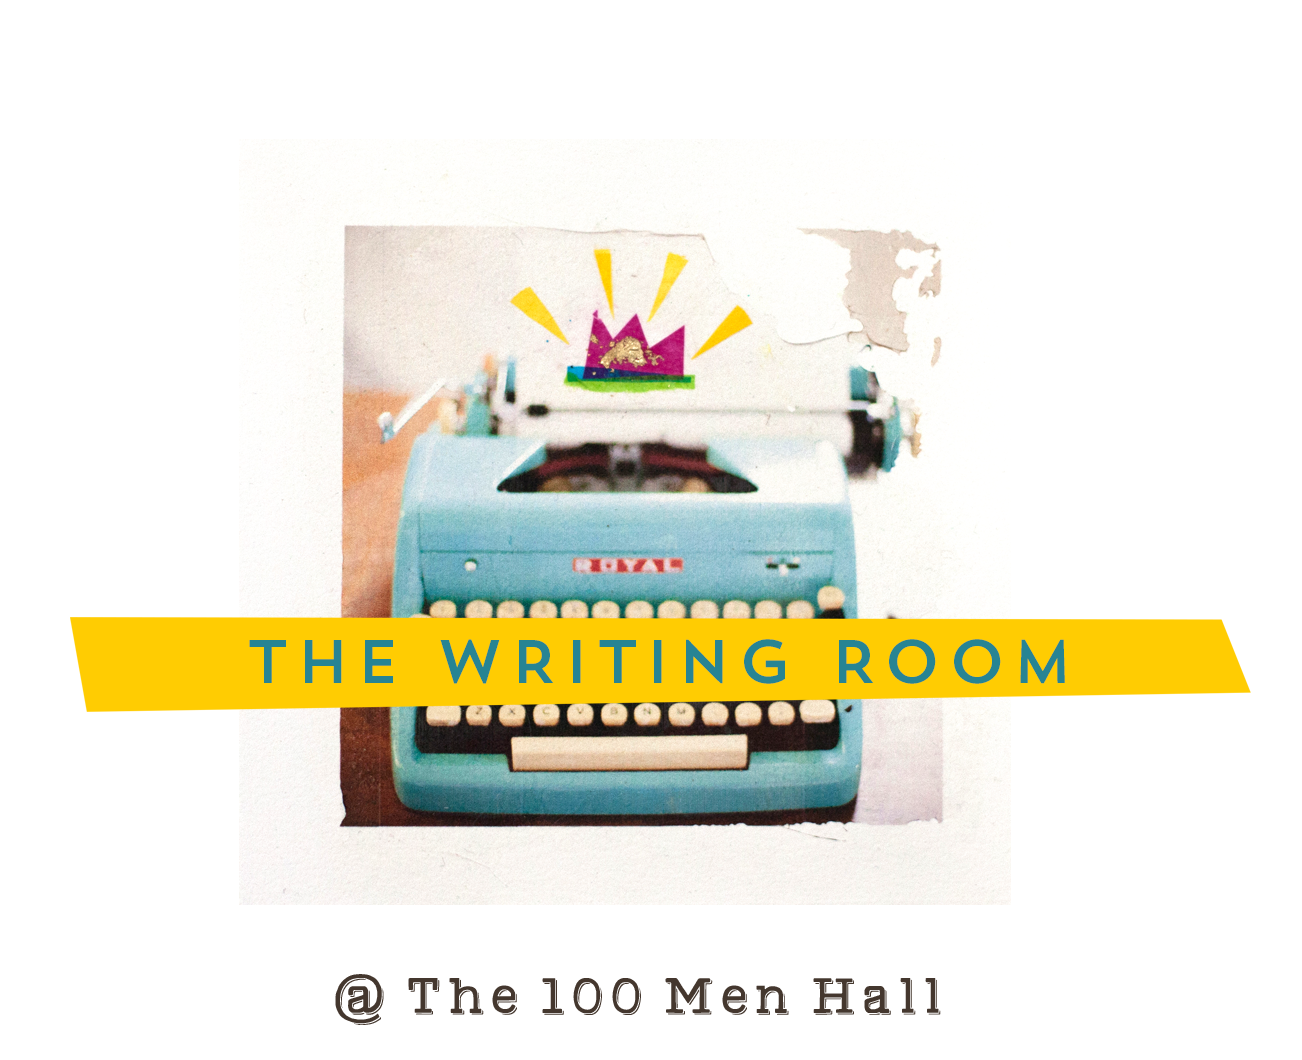 THE WRITING ROOM at 100 Men Hall